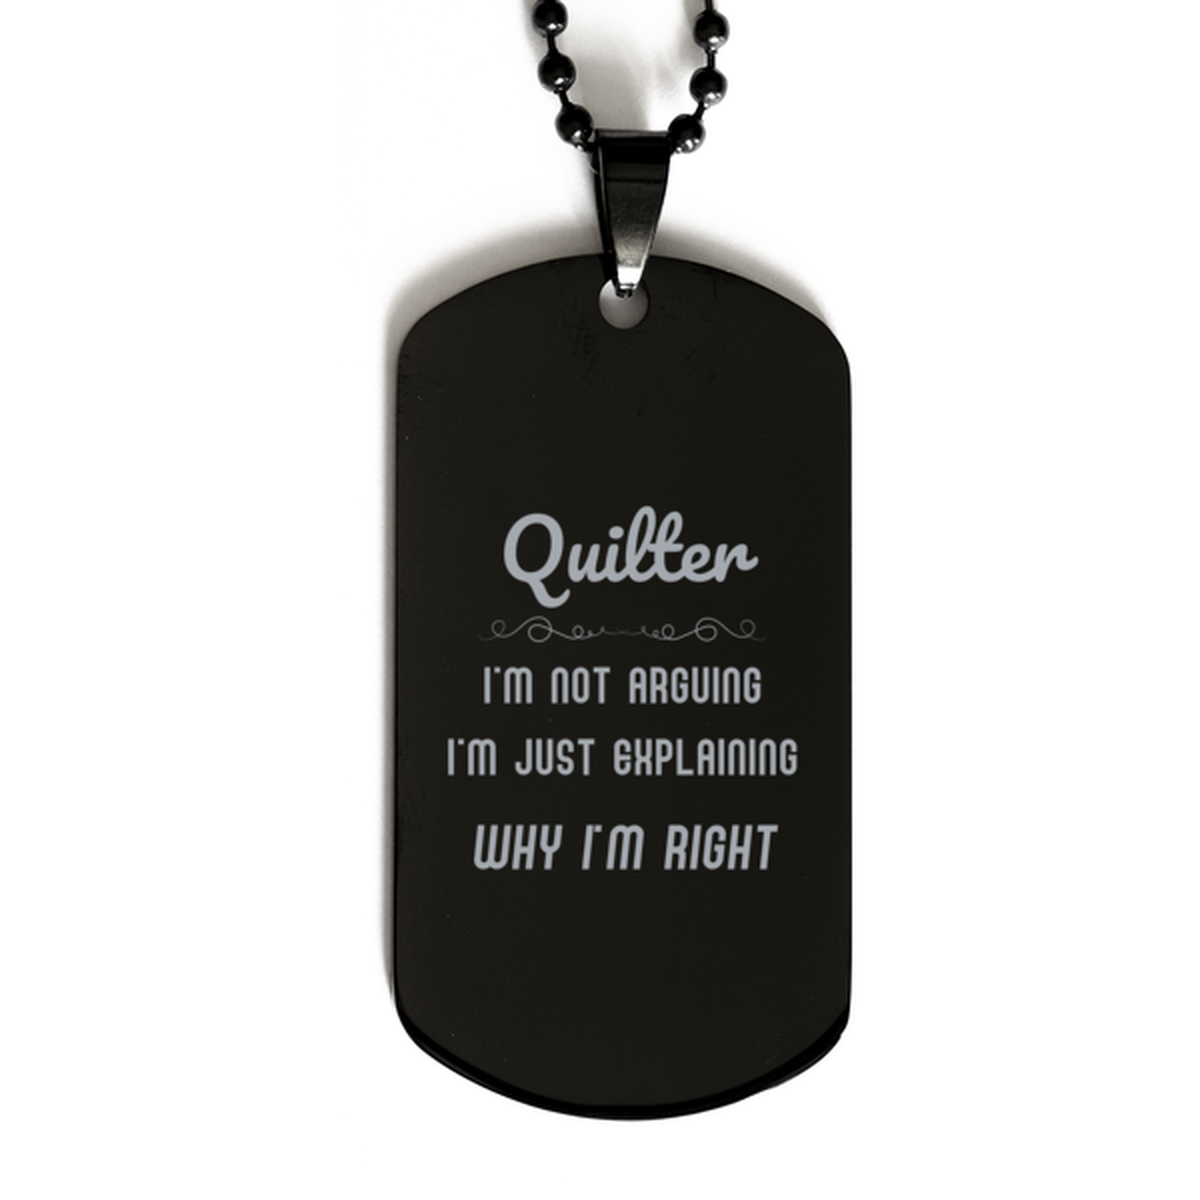 Quilter I'm not Arguing. I'm Just Explaining Why I'm RIGHT Black Dog Tag, Funny Saying Quote Quilter Gifts For Quilter Graduation Birthday Christmas Gifts for Men Women Coworker